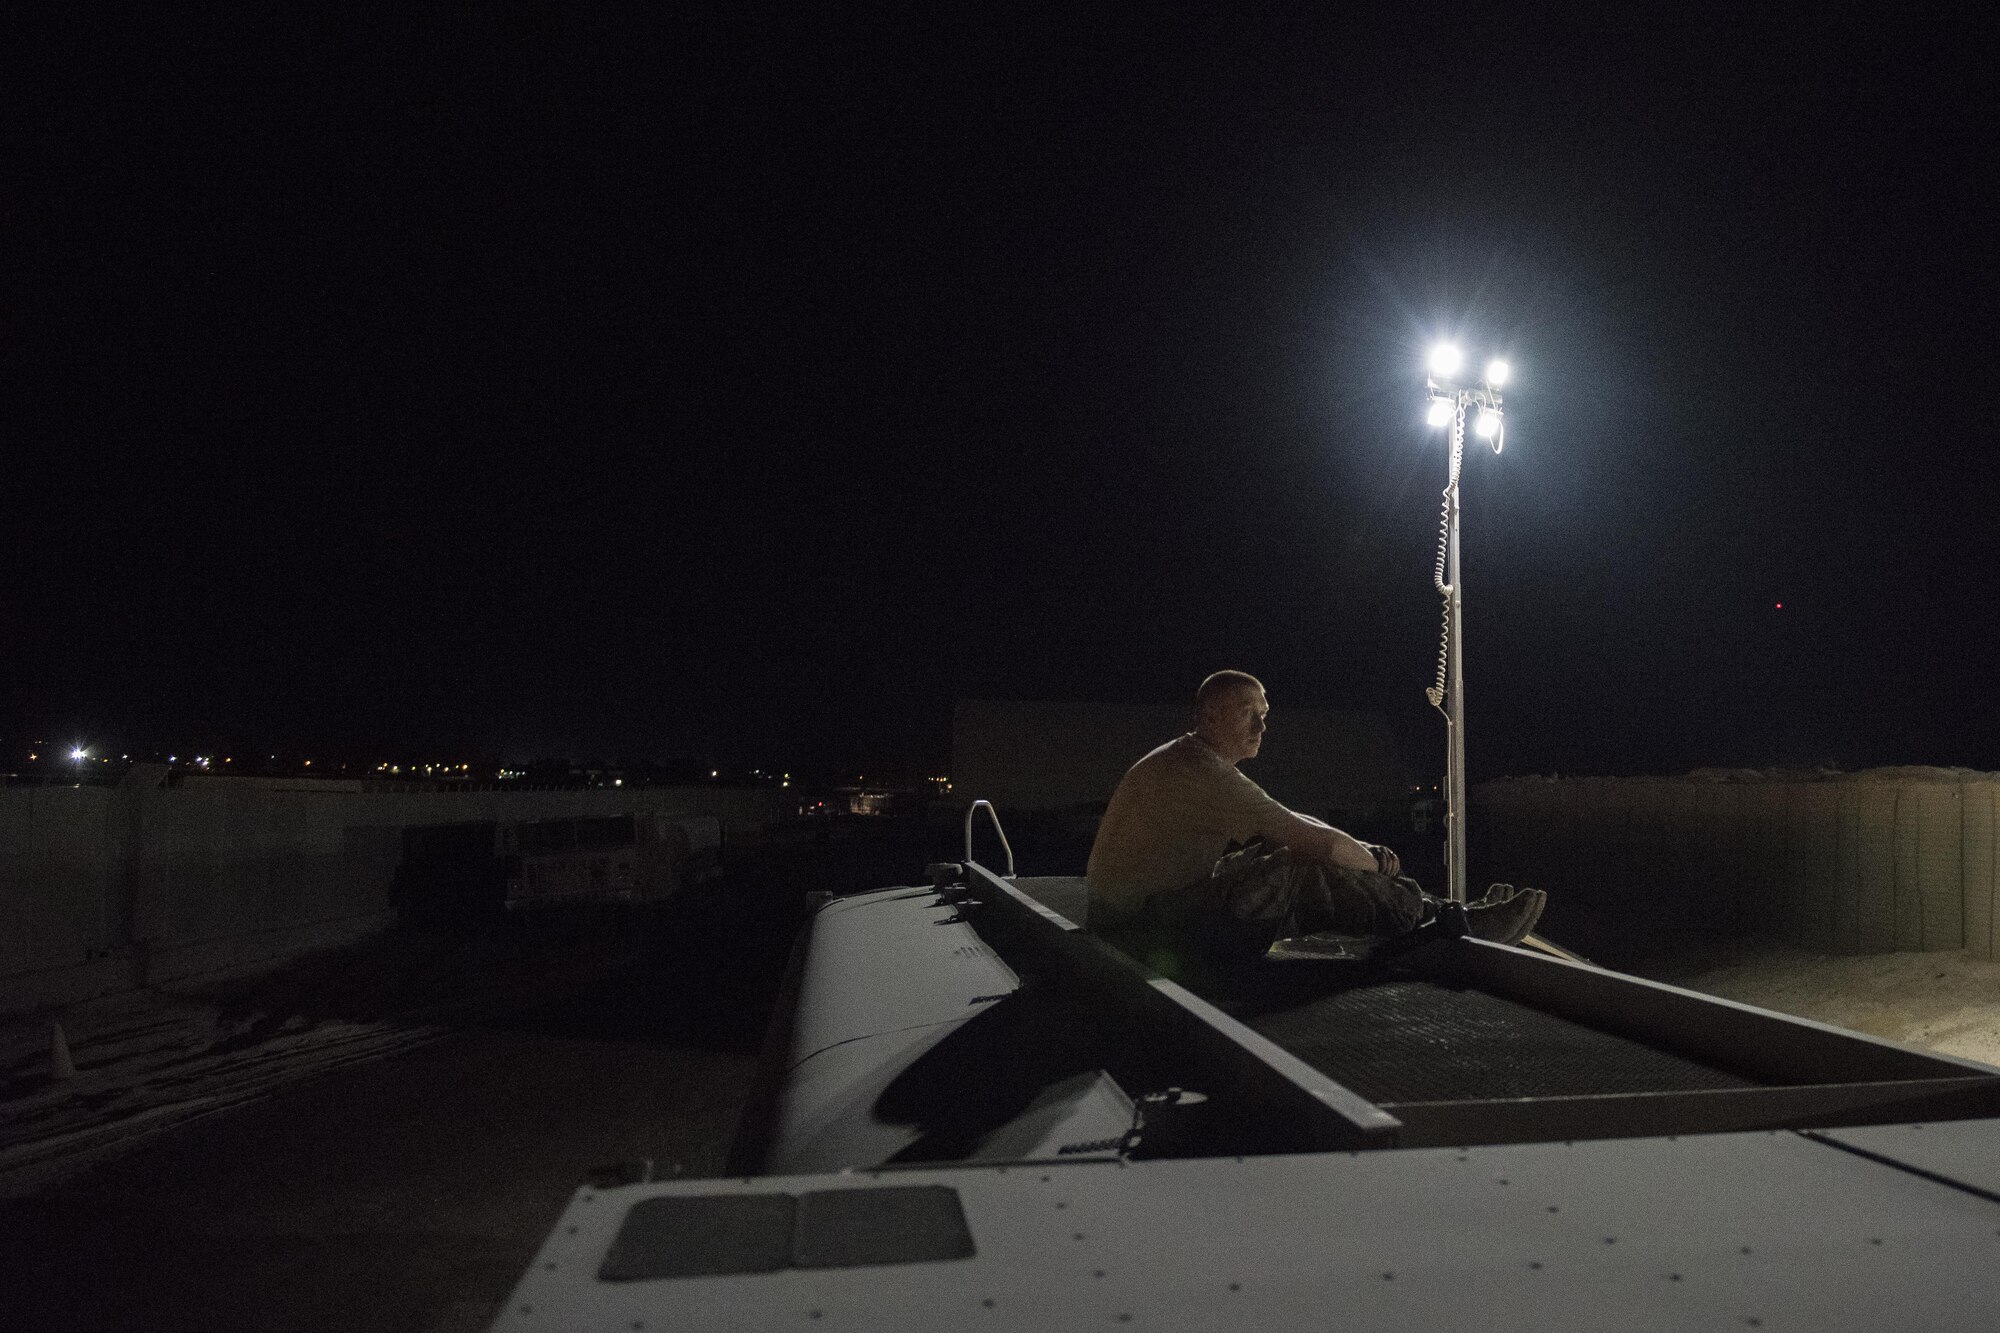 Staff Sgt. Kenneth Zaun, 332nd Expeditionary Logistics Readiness Squadron fuels flight controller, refills a fuel truck July 22, 2017 in Southwest Asia. Throughout the night members of the 332nd ELRS deliver thousands of gallons of fuel to aircraft, ensuring they are mission ready.
(U.S. Air Force photo/Senior Airman Damon Kasberg)